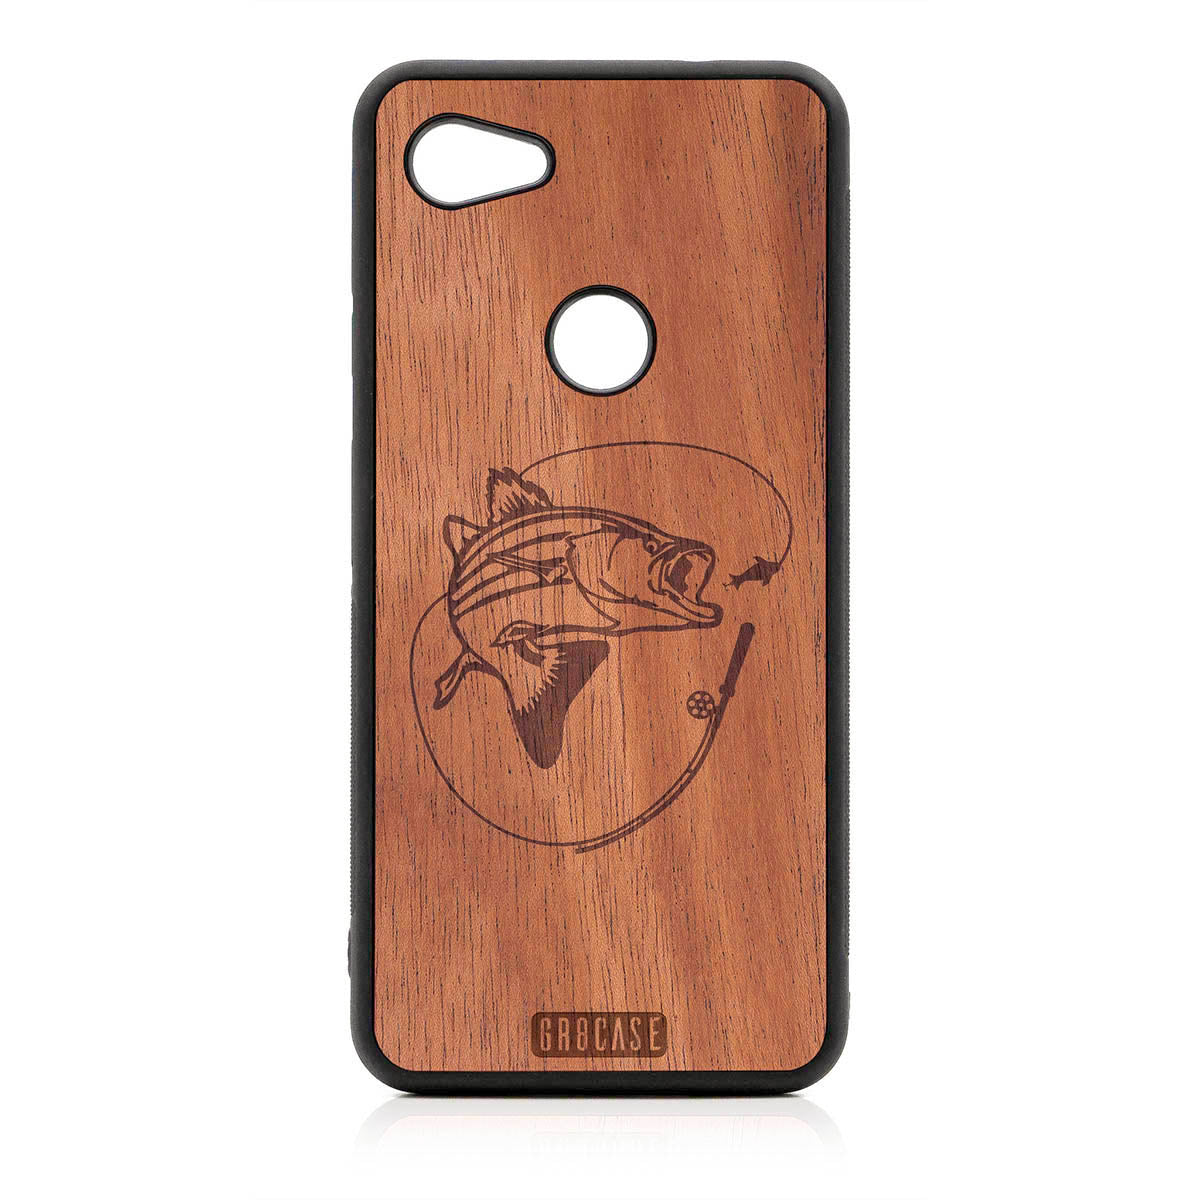 Fish and Reel Design Wood Case For Google Pixel 3A by GR8CASE